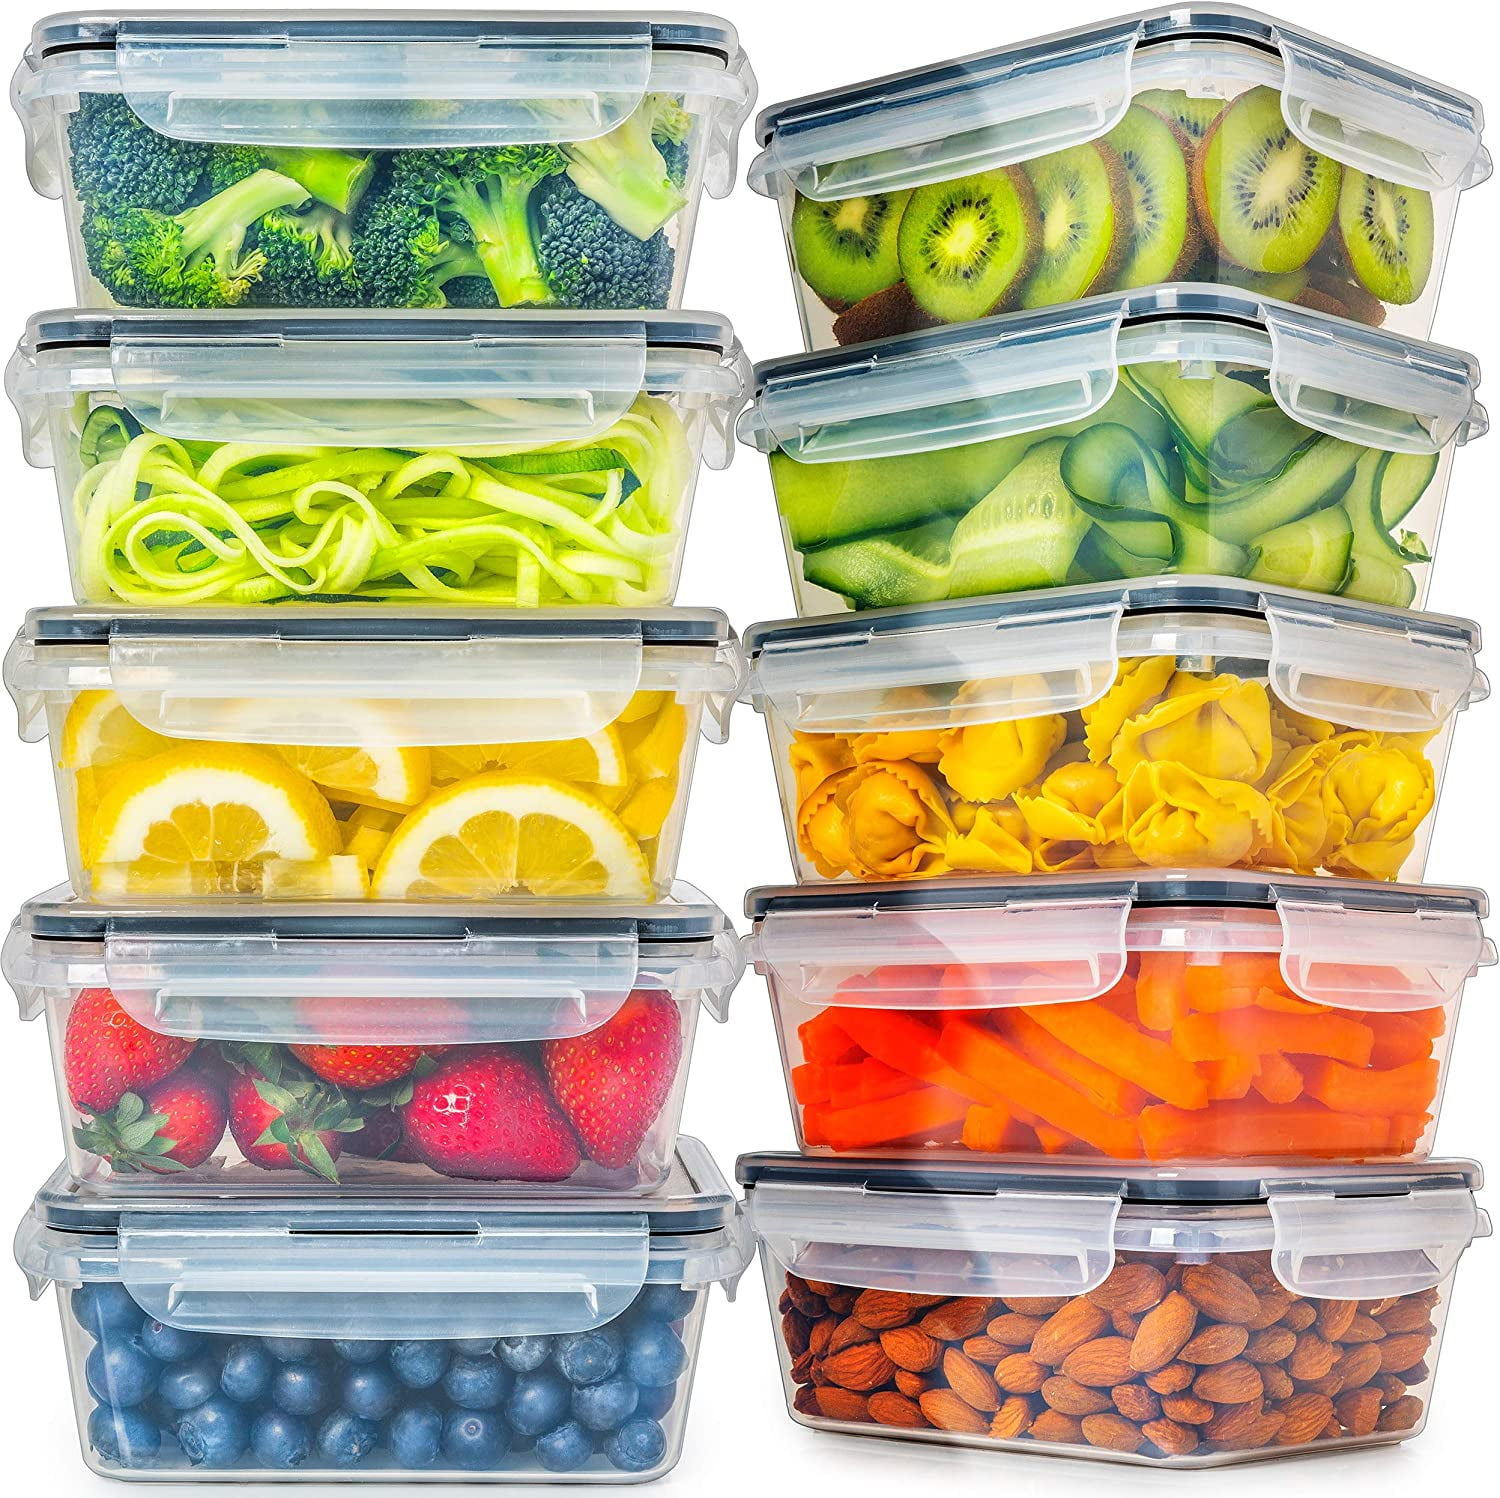 Fullstar Food Storage Containers with Lids (17 Pack) - Plastic